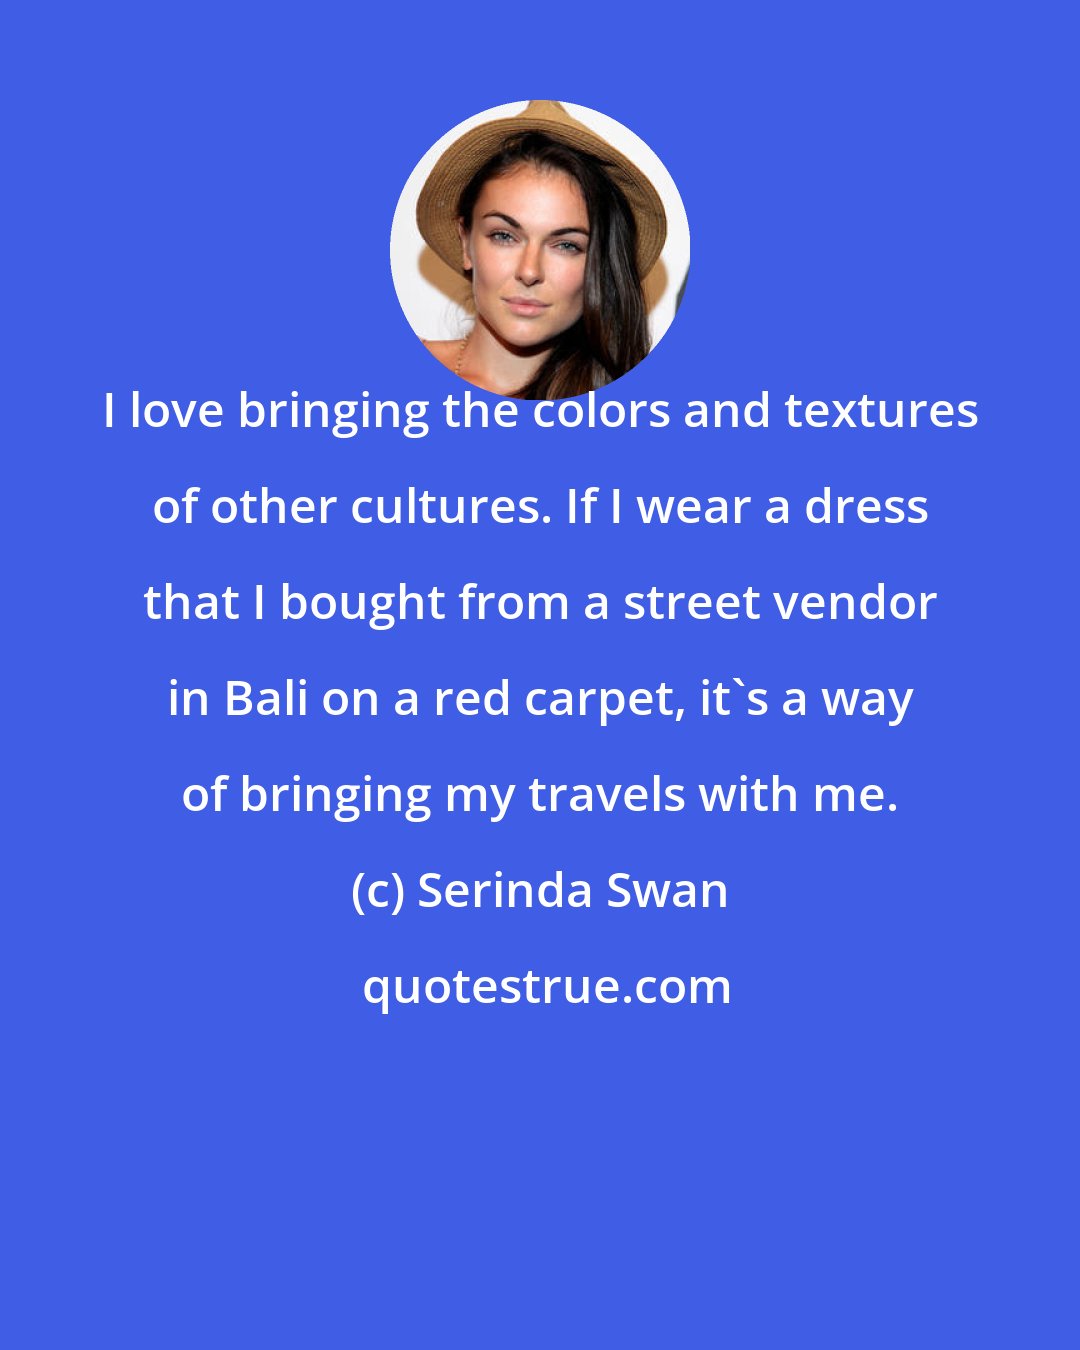 Serinda Swan: I love bringing the colors and textures of other cultures. If I wear a dress that I bought from a street vendor in Bali on a red carpet, it's a way of bringing my travels with me.